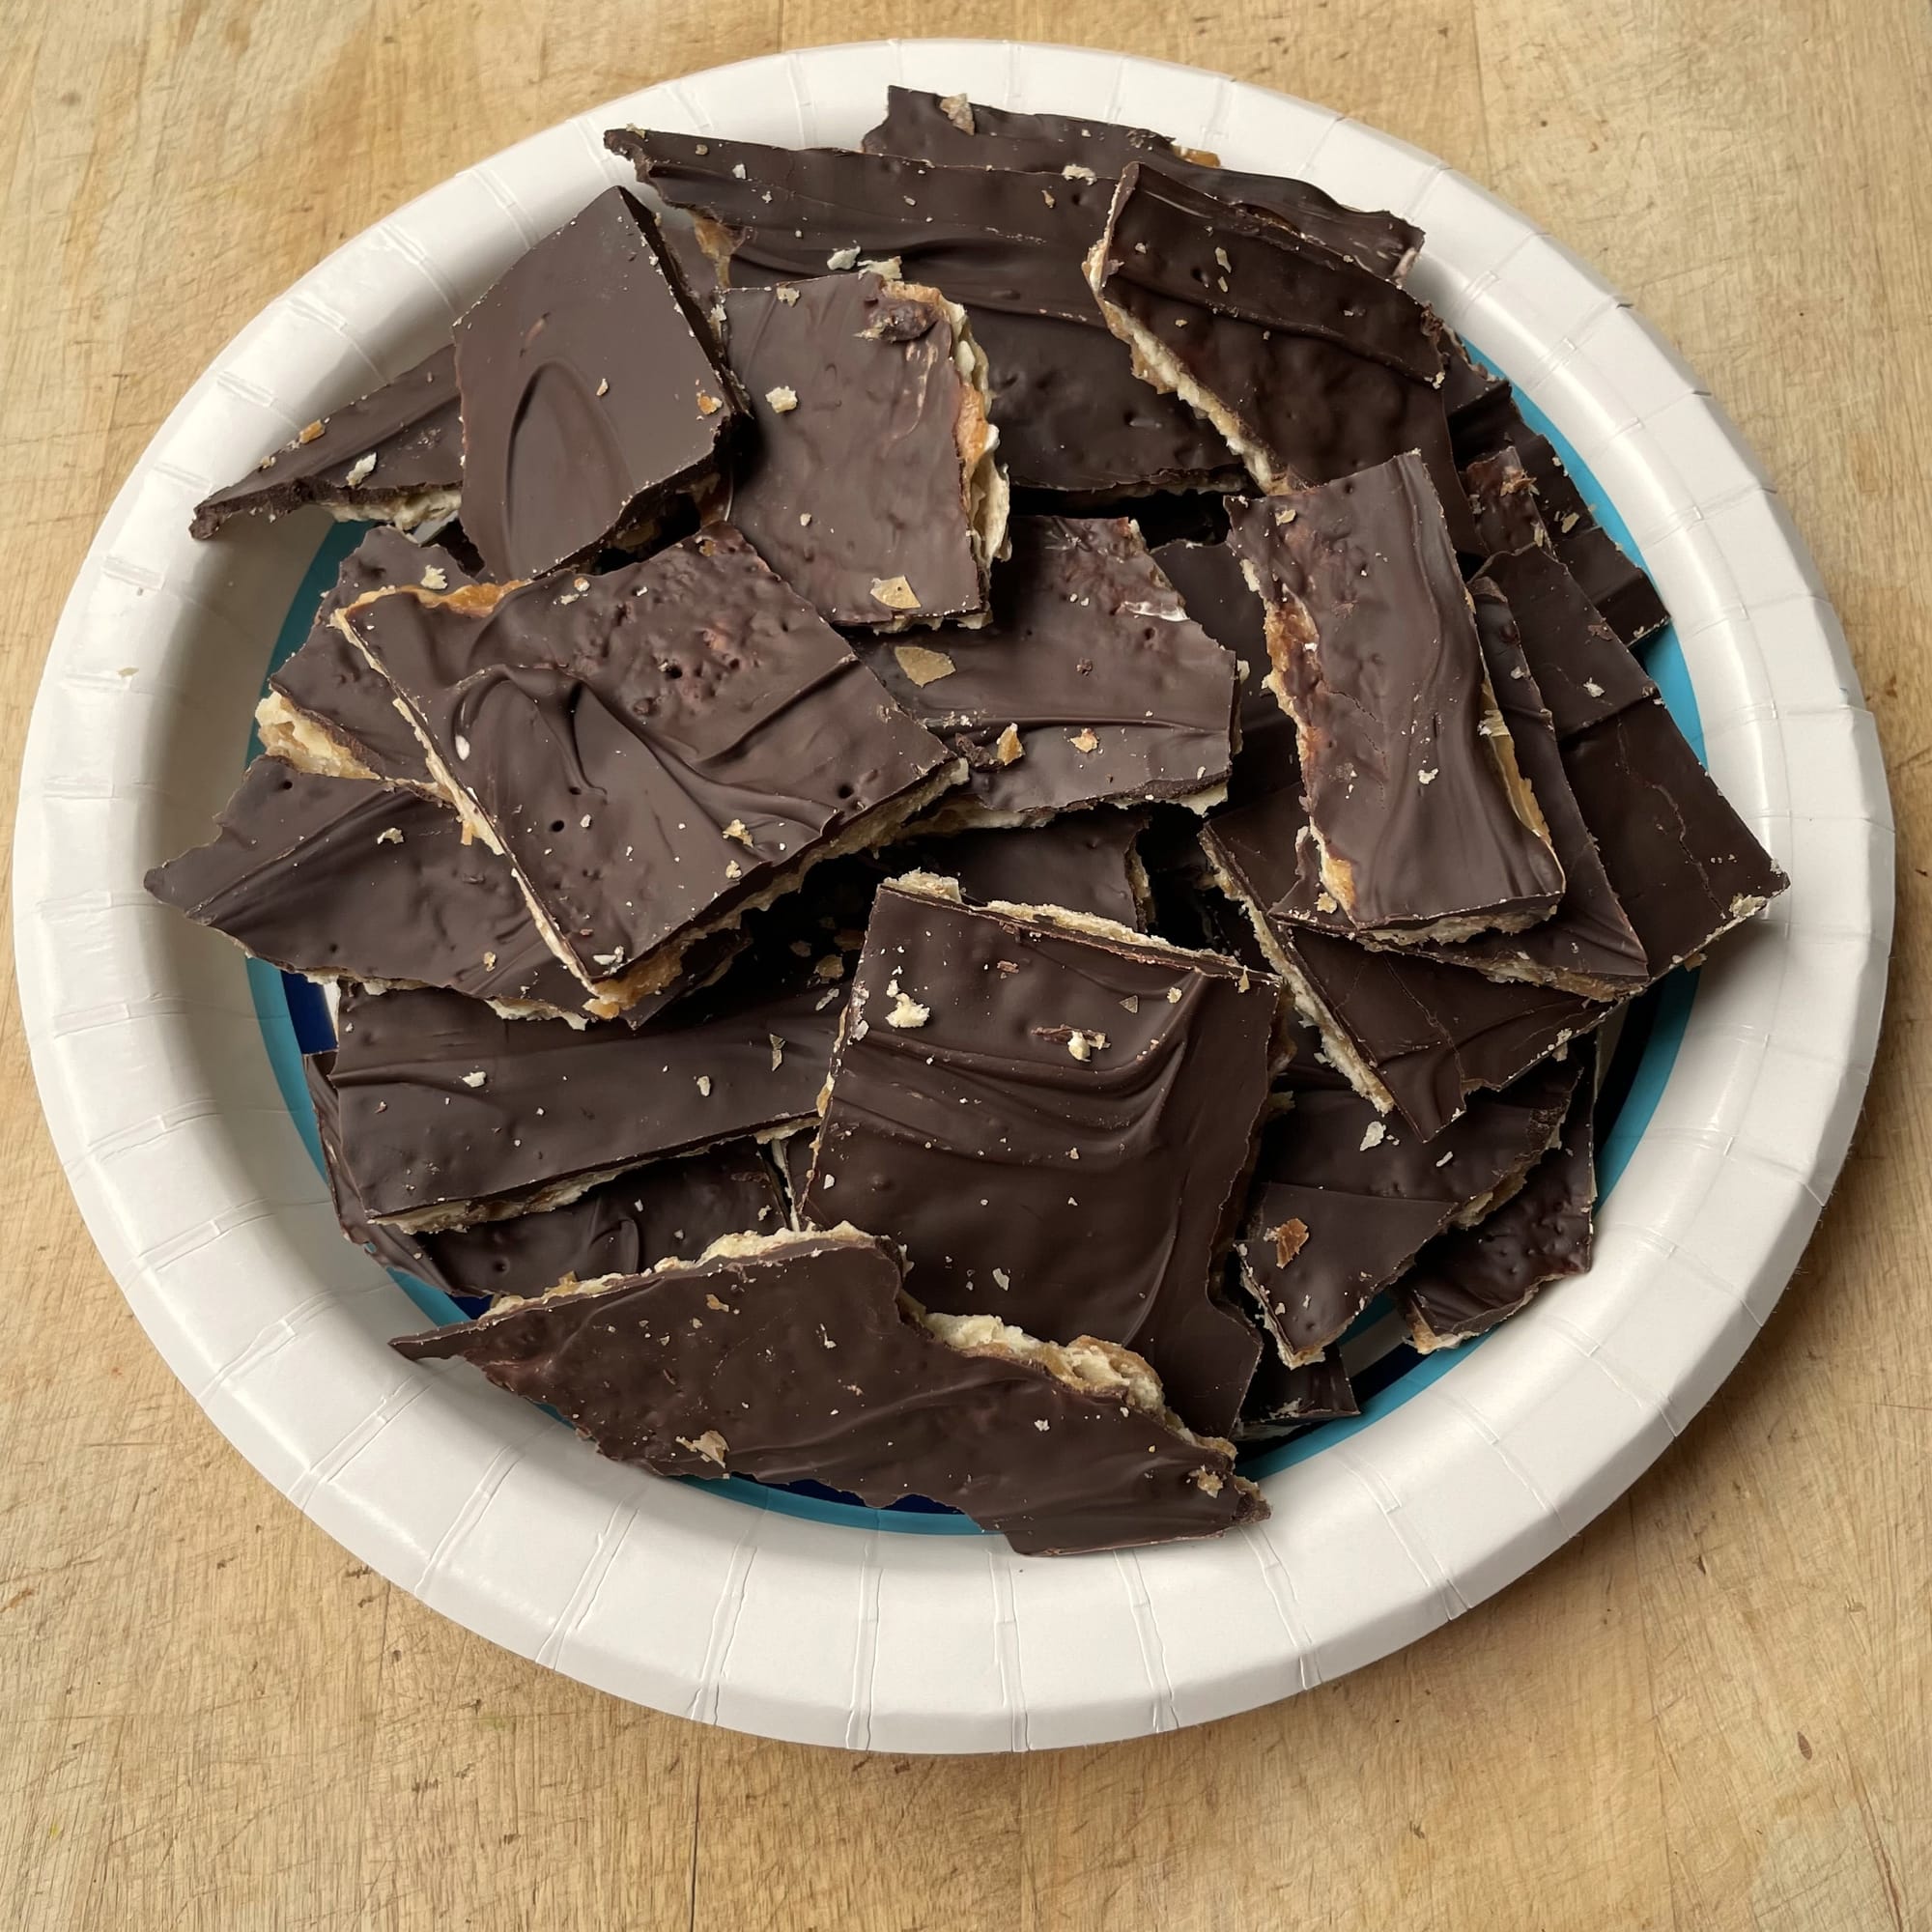 Paper plate piled with pieces of matzah toffee, a crisp cracker with a layer of toffee and a chocolate topping